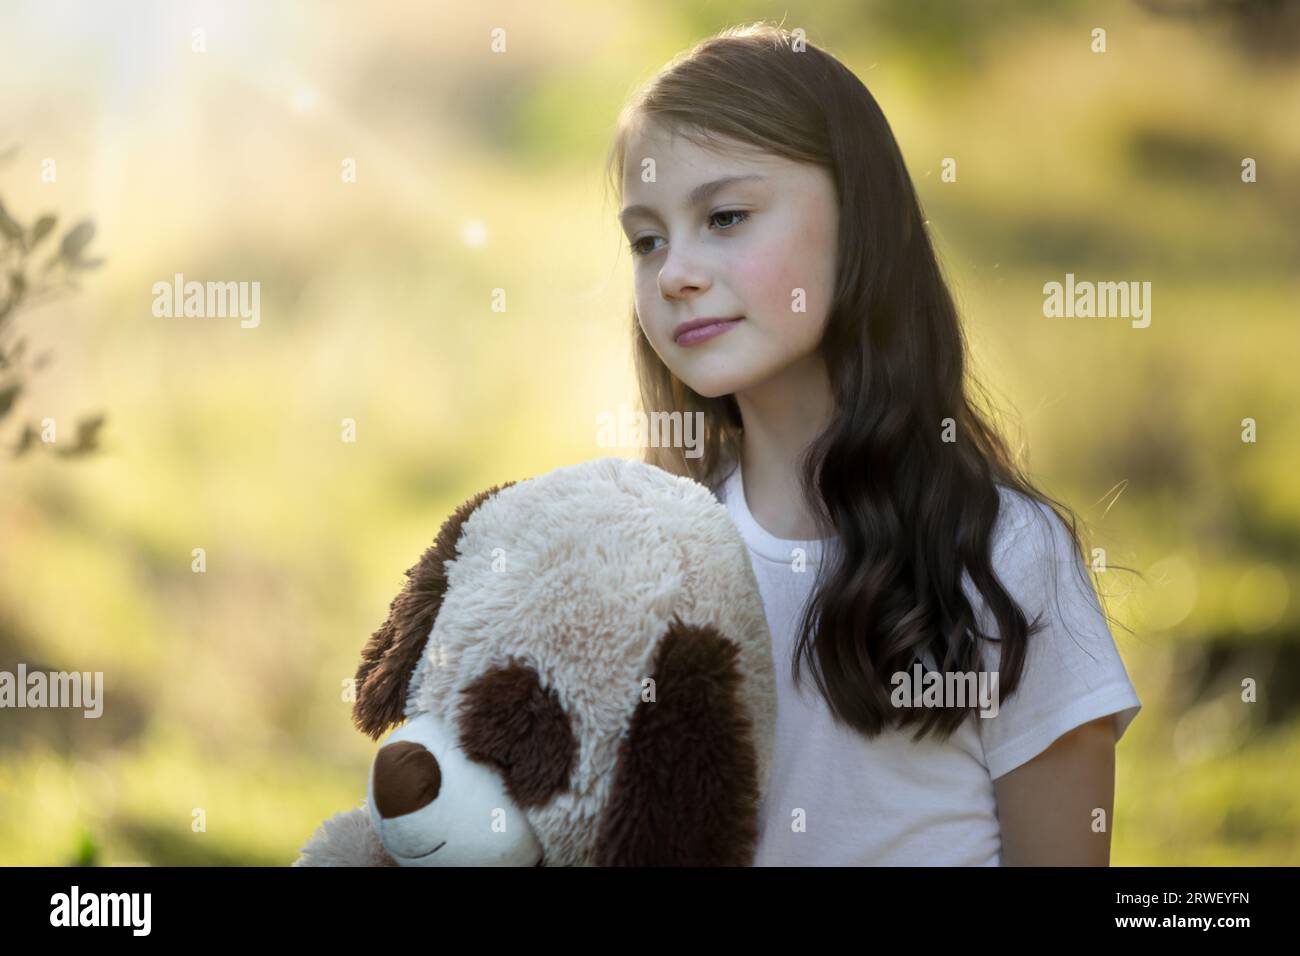 Close-up of a young girl holding her teddy at sunset Stock Photo